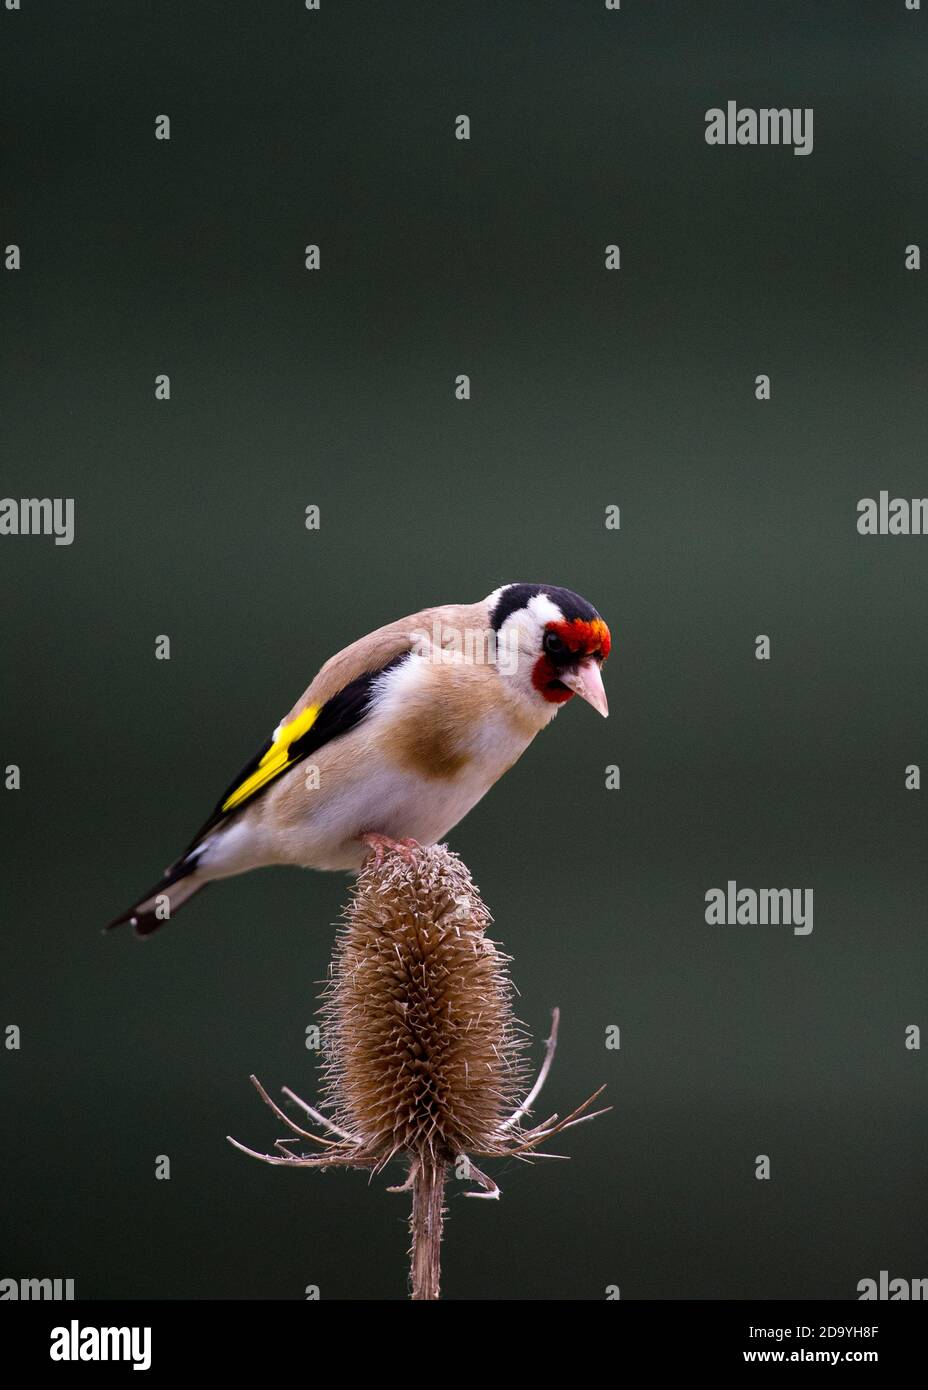 Goldfinch perched on Teasel Stock Photo